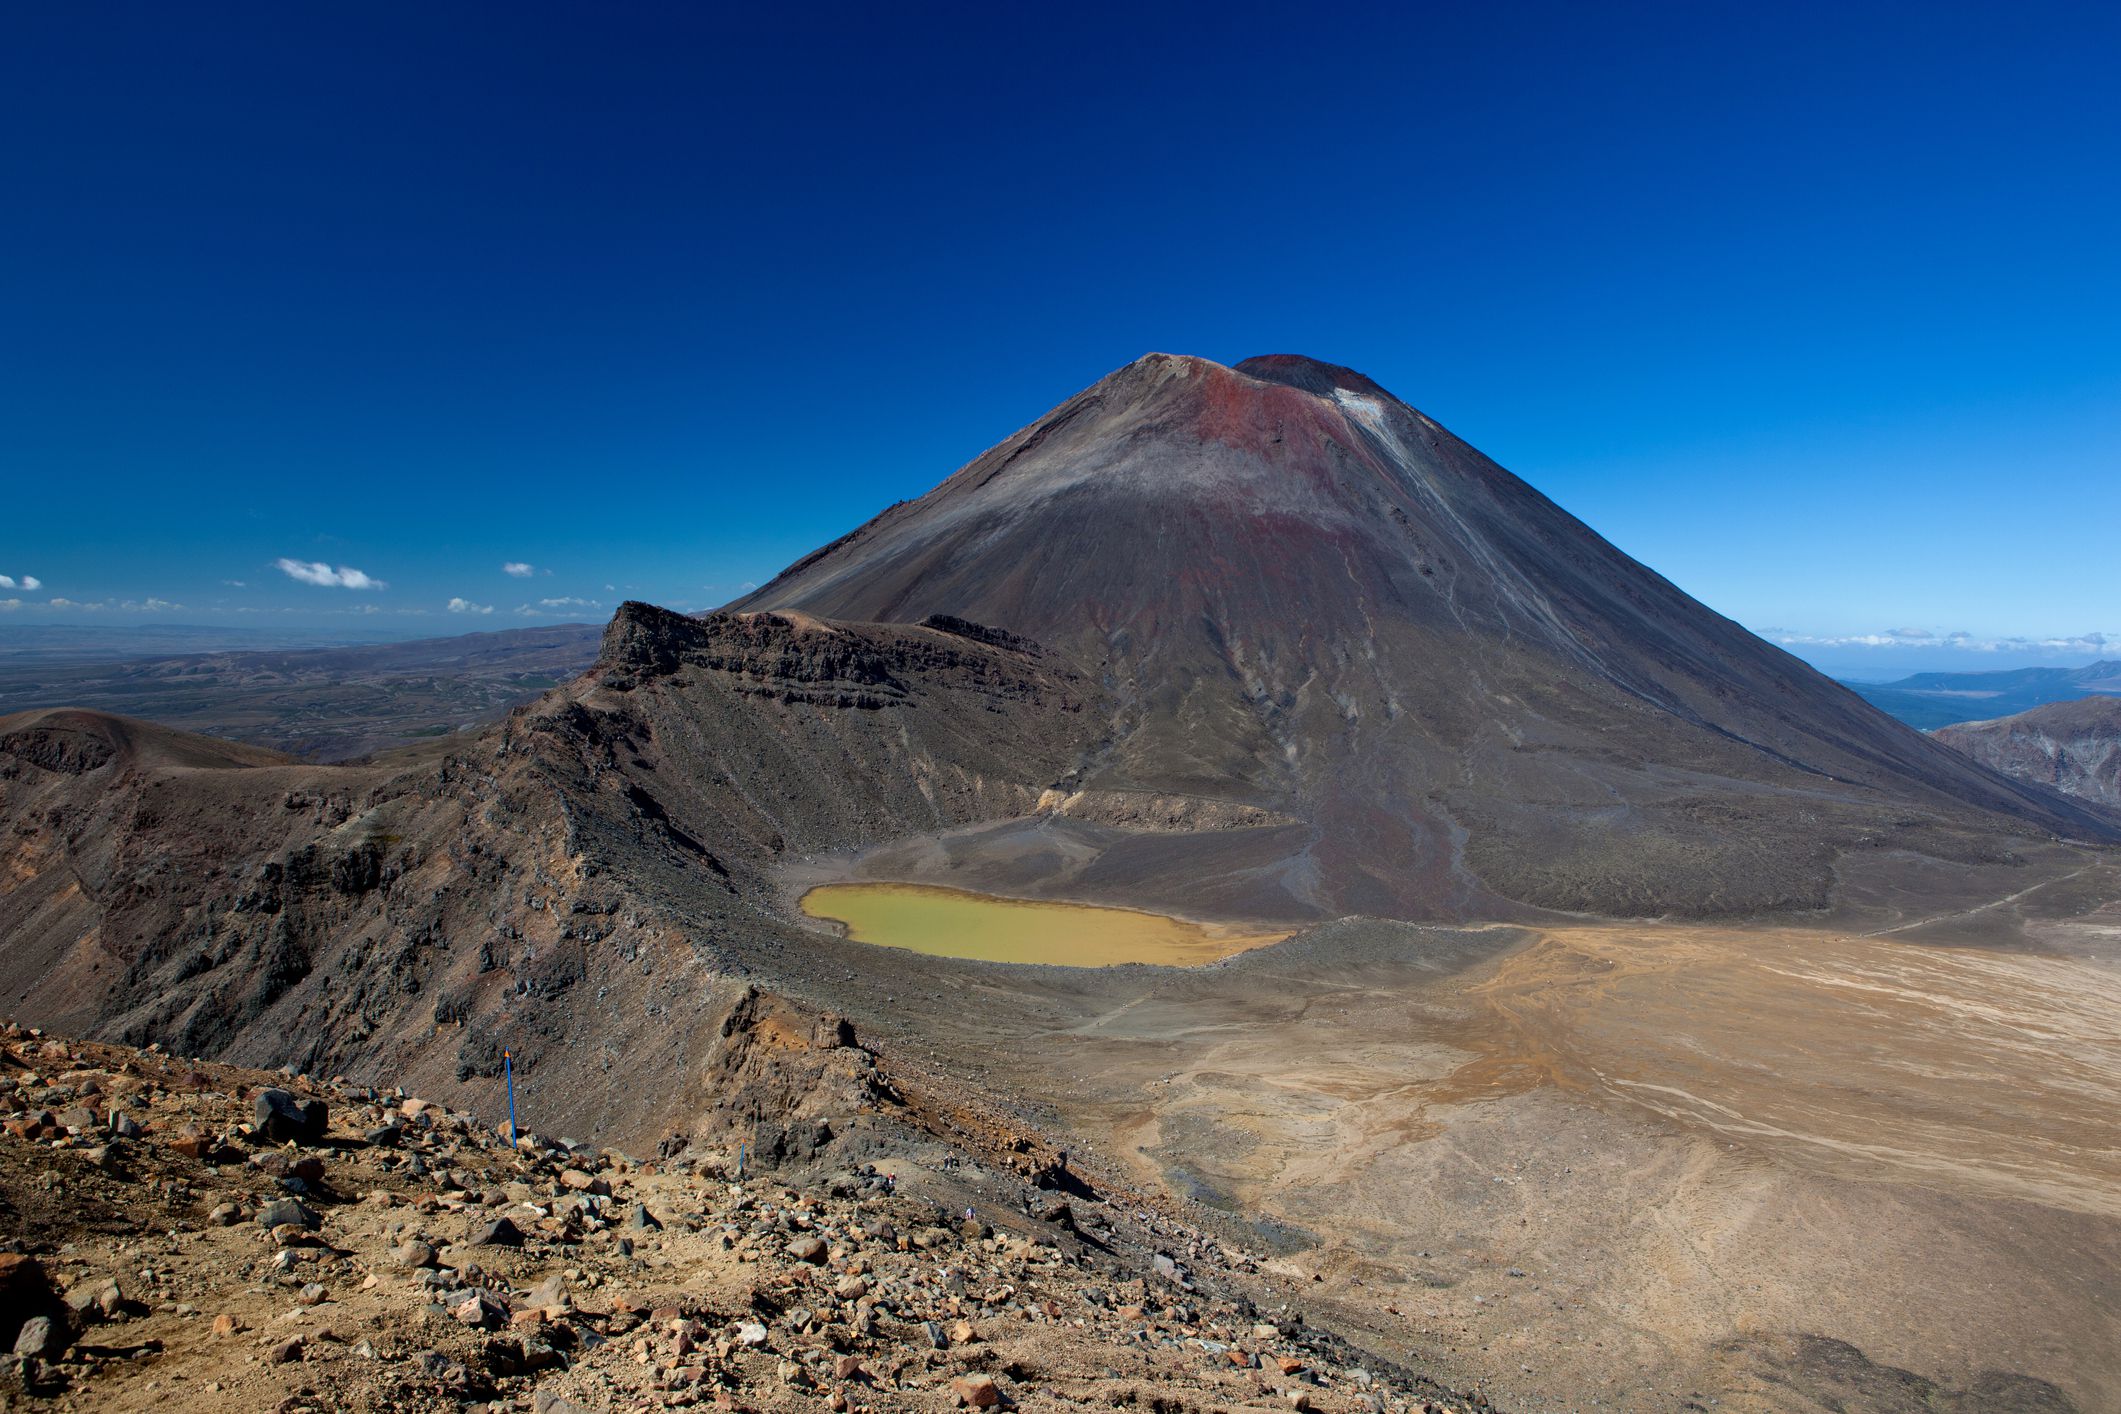 <p><b>New Zealand<br>Elevation:</b> 6,489 feet<br>In addition to being the dramatic site of Mount Doom of the "Lord of the Rings" fame, Mount Ngauruhoe is a spectacular mountain in <a href="https://www.doc.govt.nz/parks-and-recreation/places-to-go/central-north-island/places/tongariro-national-park/?tab-id=50578">Tongariro National Park</a>. This mountain has an awesome hike that can be done with a guide (to make sure you're not one of those Hobbits that the treacherous climb takes out). After your trek, stay for skiing, biking, climbing, or camping.      </p><p><b>Related:</b> <a href="https://blog.cheapism.com/movie-locations-you-must-see/">50 Iconic Movie Locations Around the World</a></p>